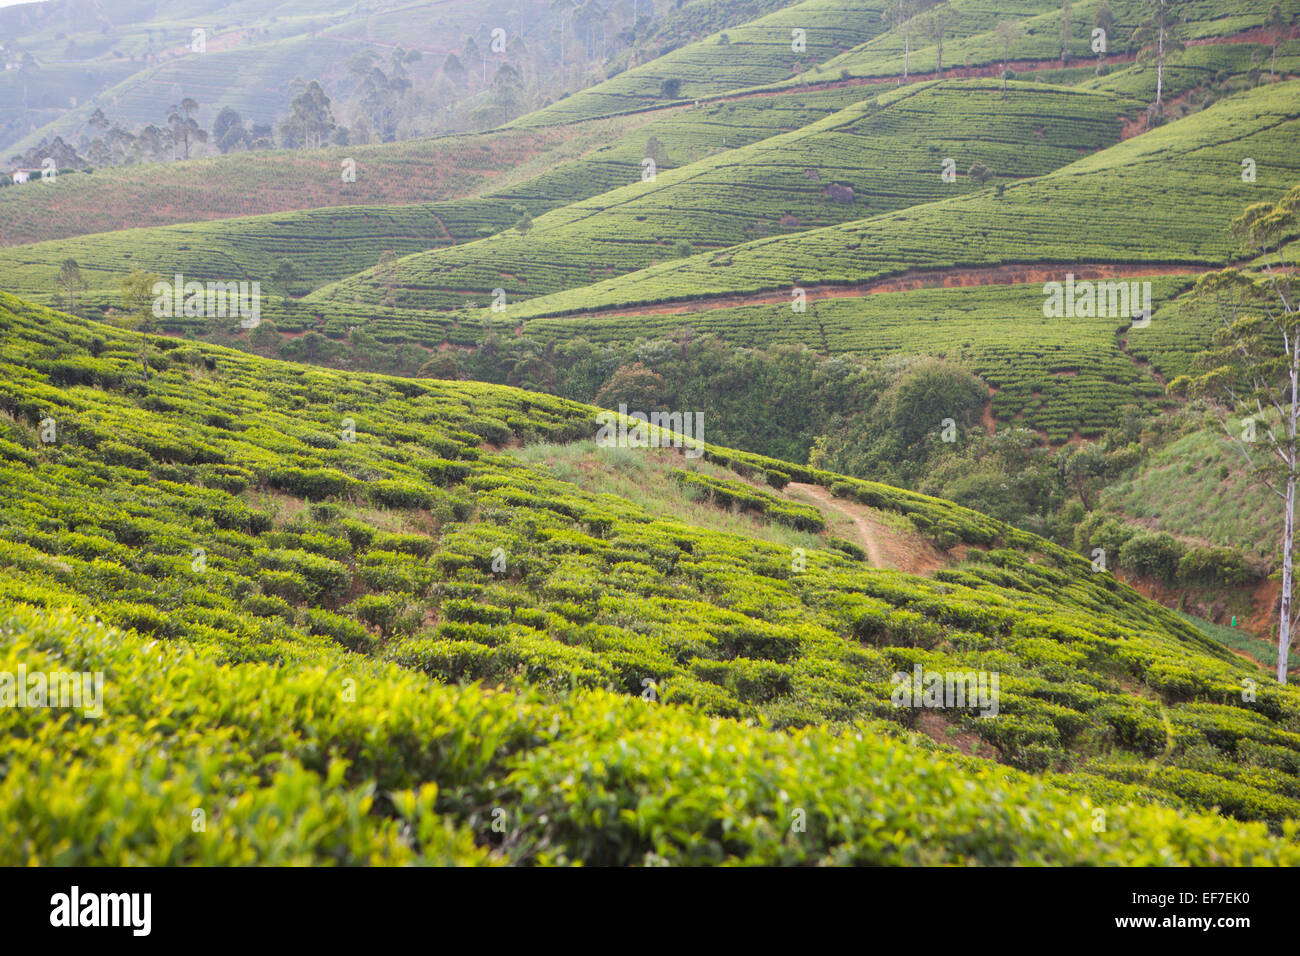 VIEW ACROSS NUWARA ELIYA TEA PLANTATIONS IN THE SOUTHERN HILL COUNTRY Stock Photo